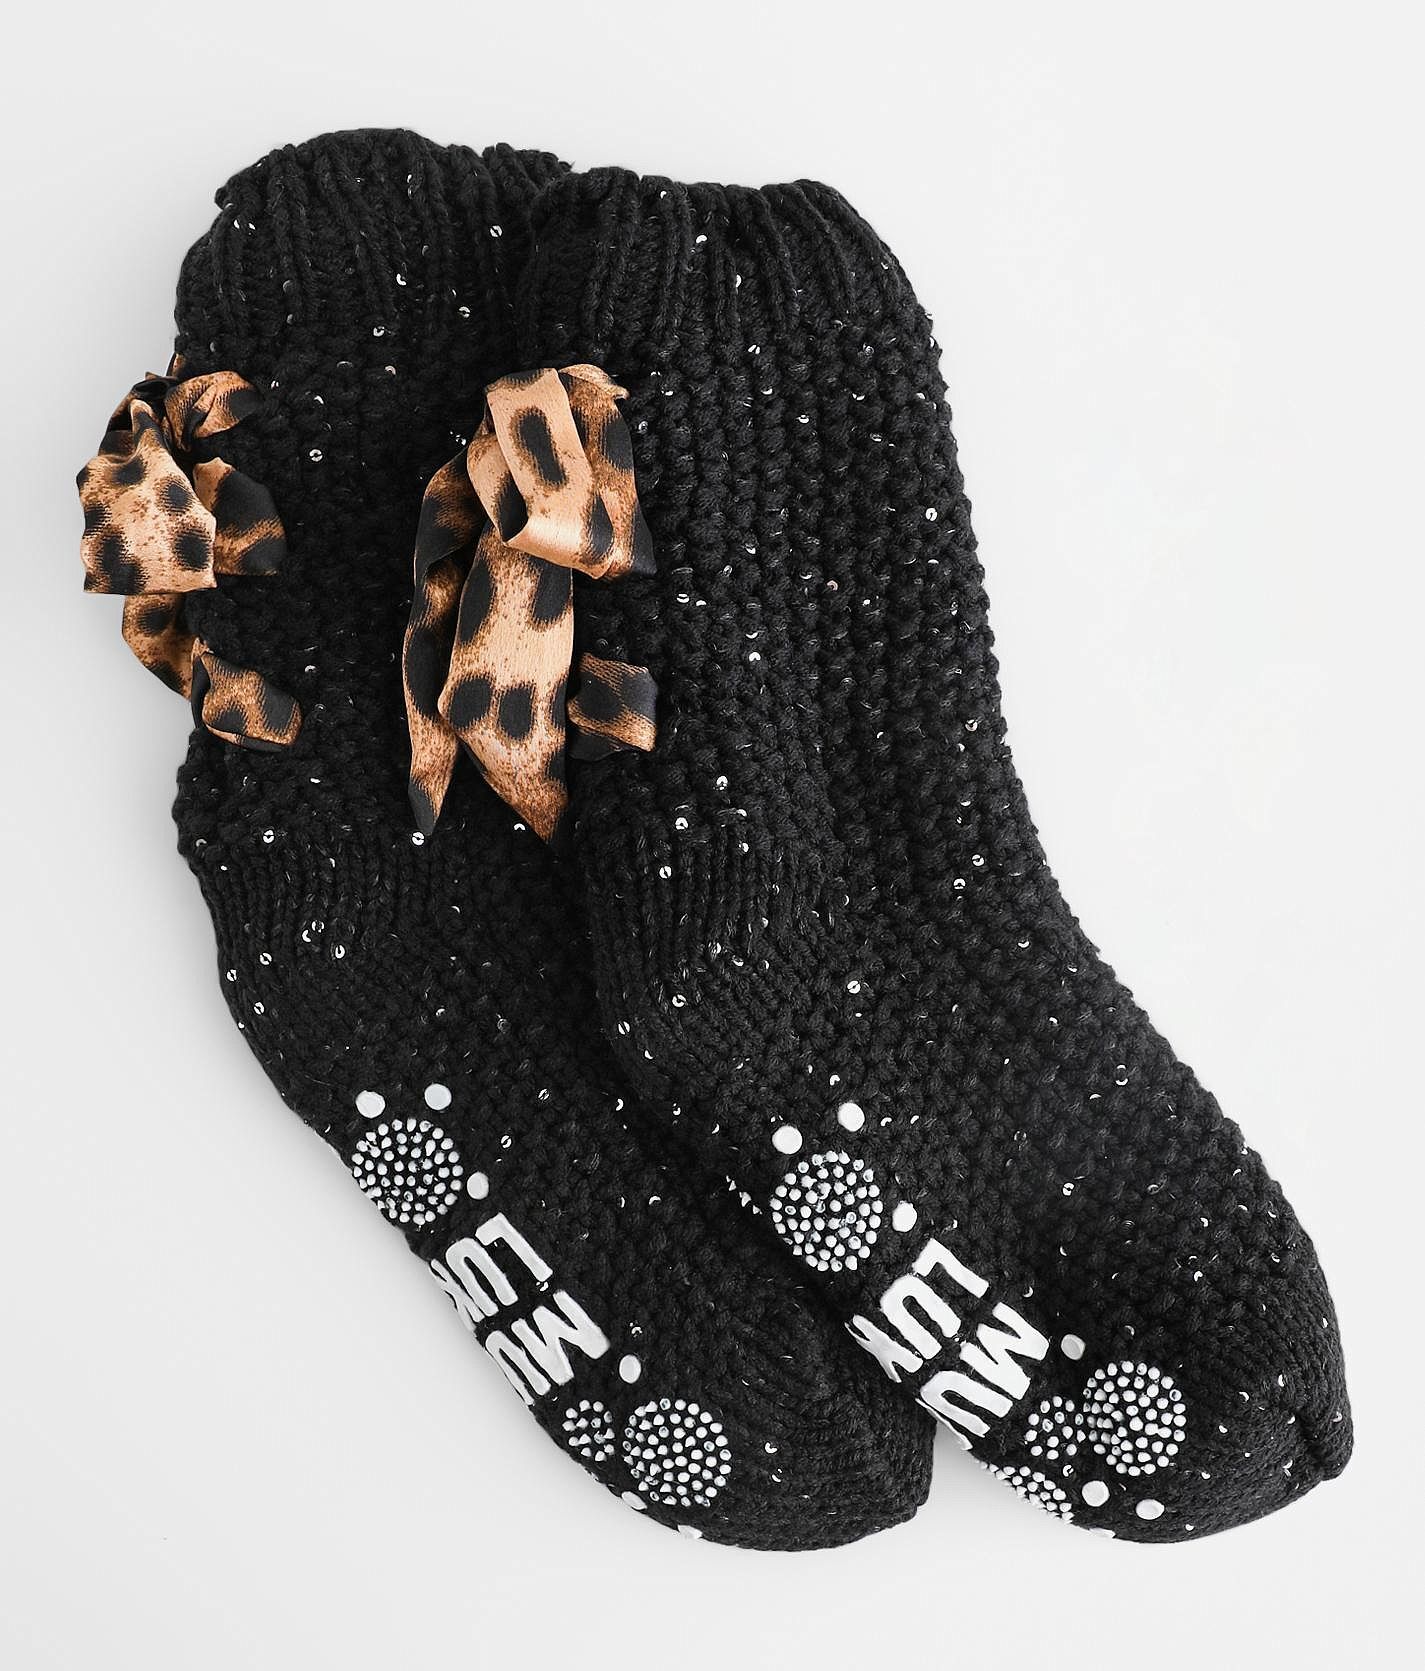 Muk Luks Lace-up Sequins Socks  - Black - female - Size: Small